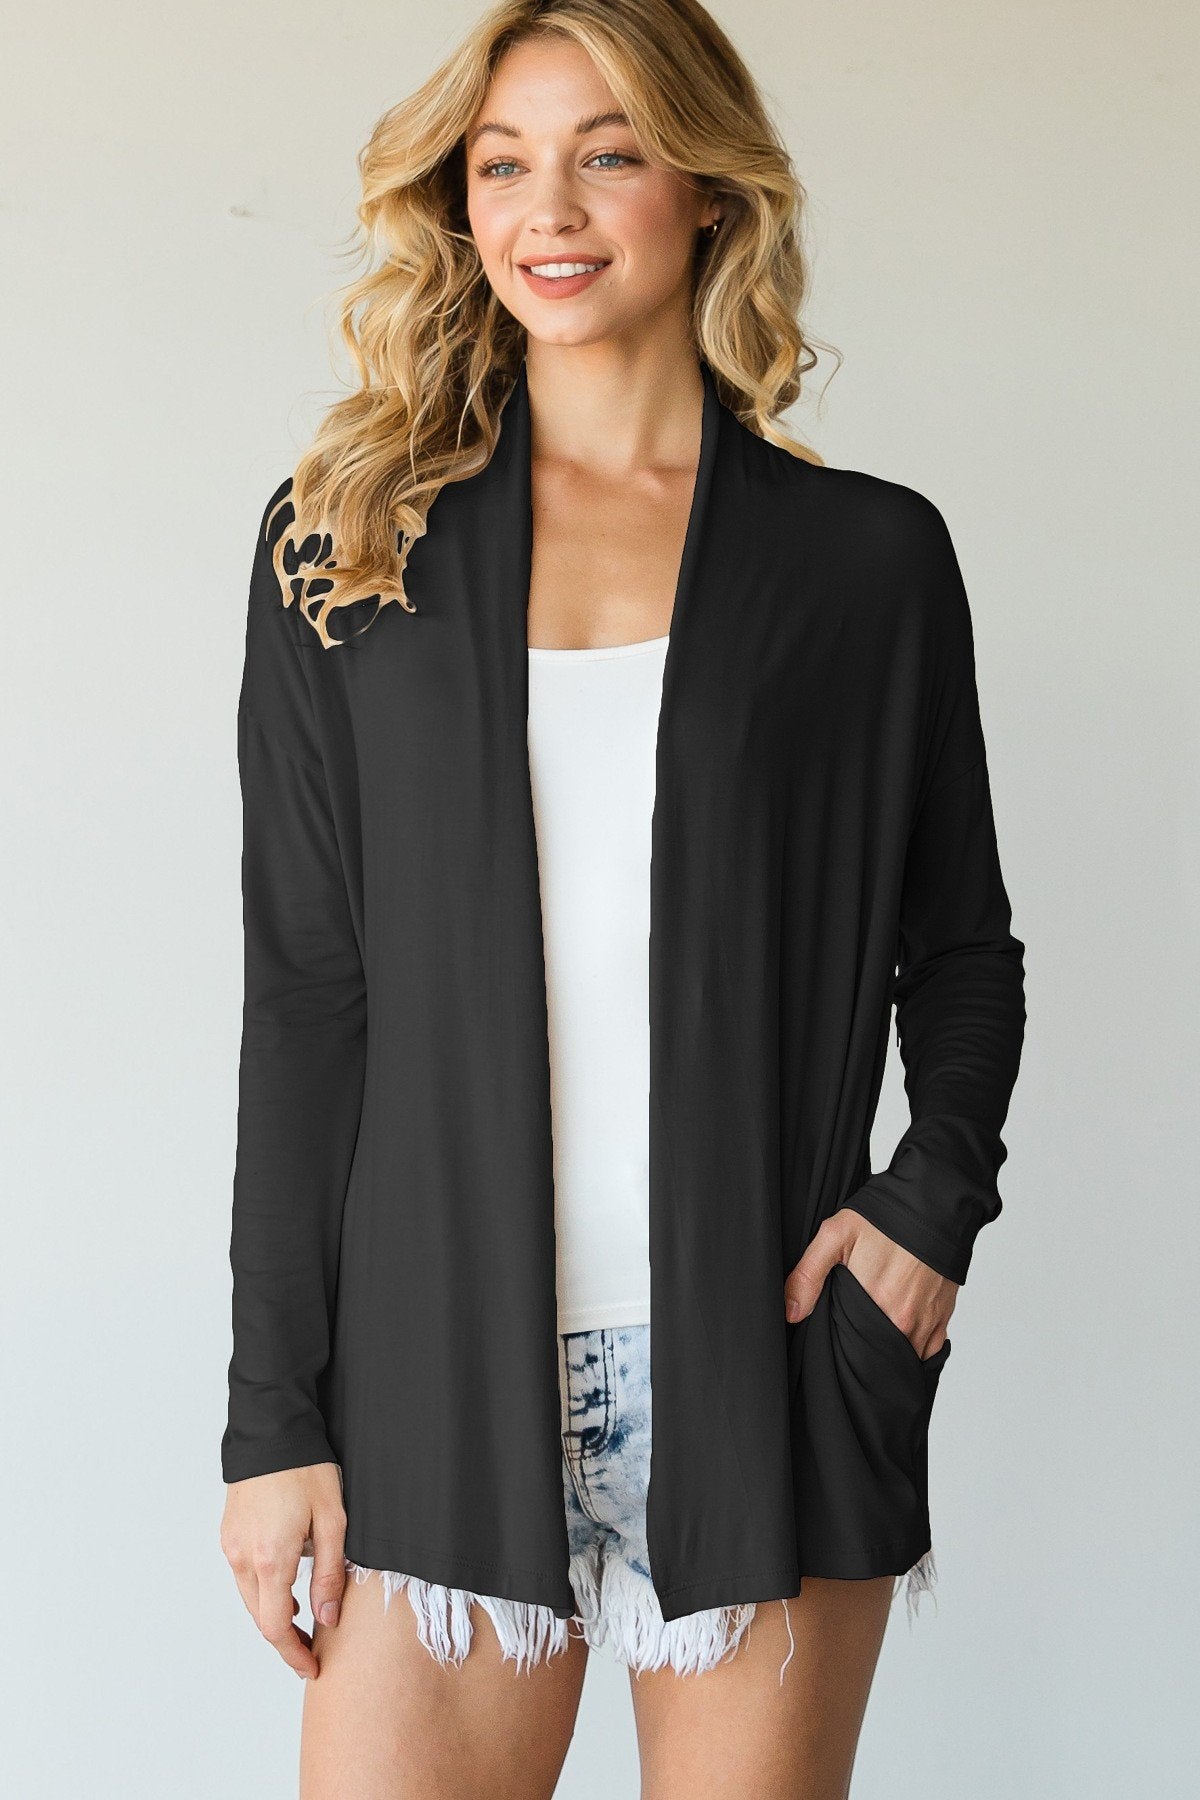 Women's Casual Cardigan Featuring Collar And Side Pockets